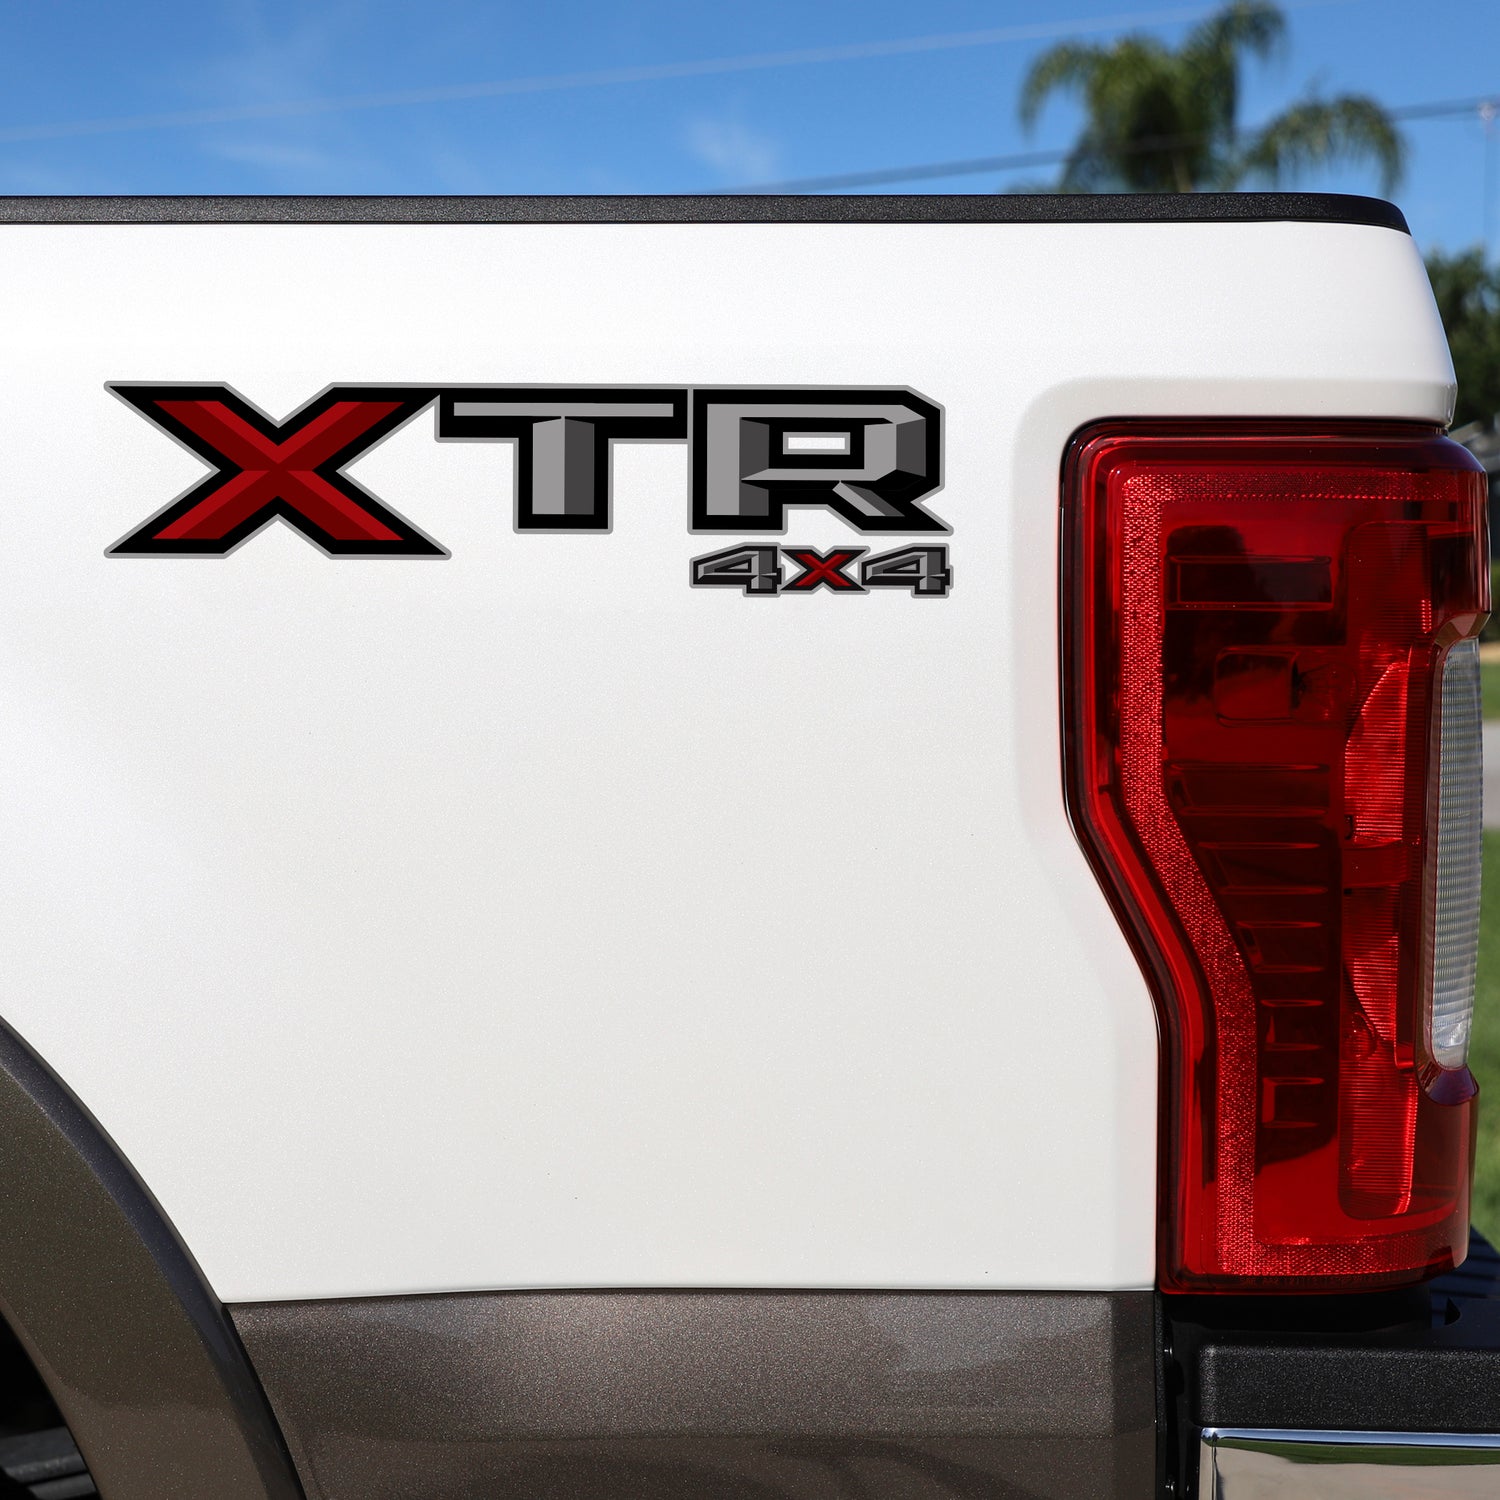 Set of 2: XTR 4X4 vinyl decal for 2017-2019 Ford F-150 F-250 pickup truck bedside - US Rallystripes